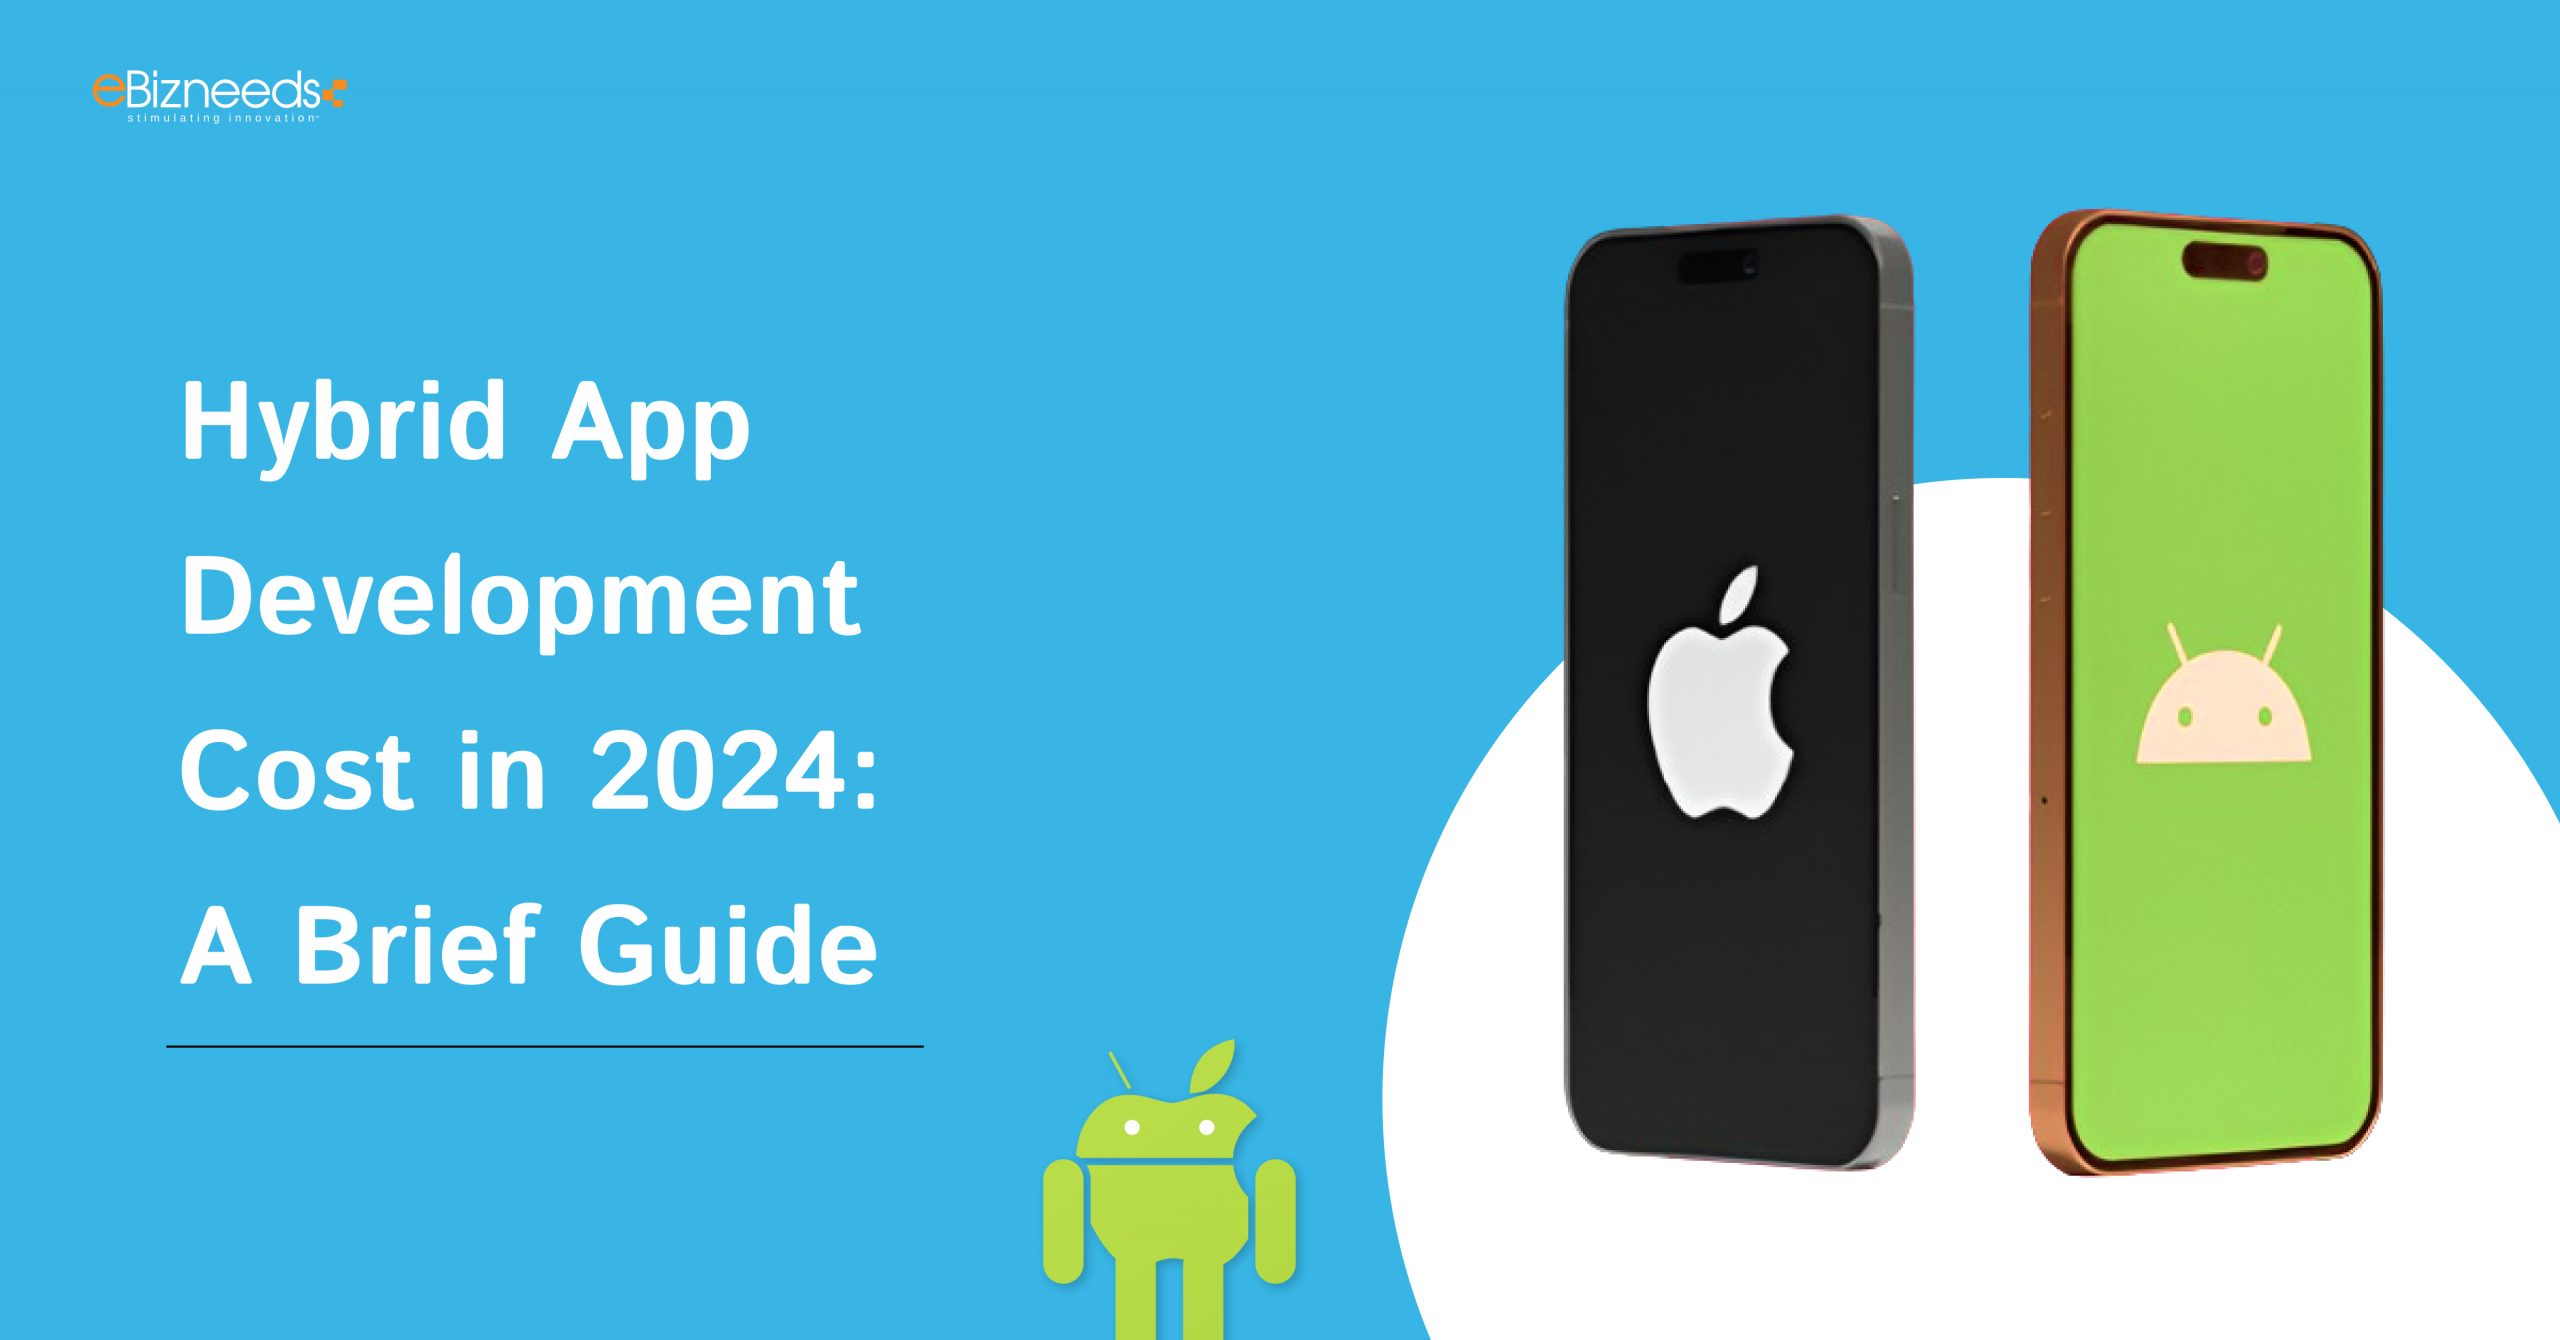 Here we will describe the factors associated with hybrid app development cost and the steps involved for a seamless application development.